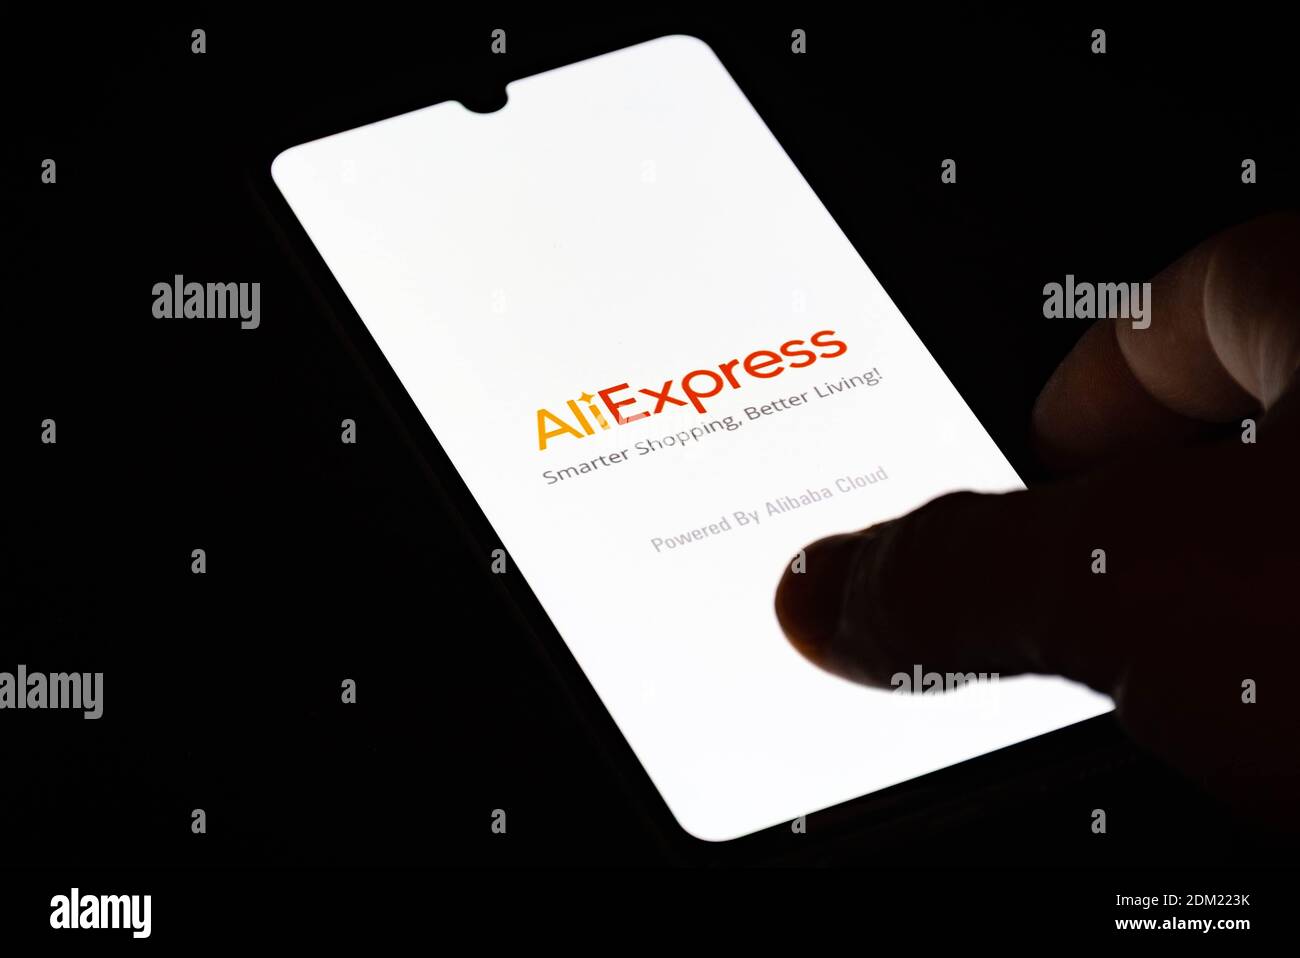 AliExpress app on the smartphone, shopping on line, online retail service based in China owned by the Alibaba Group with finger Stock Photo